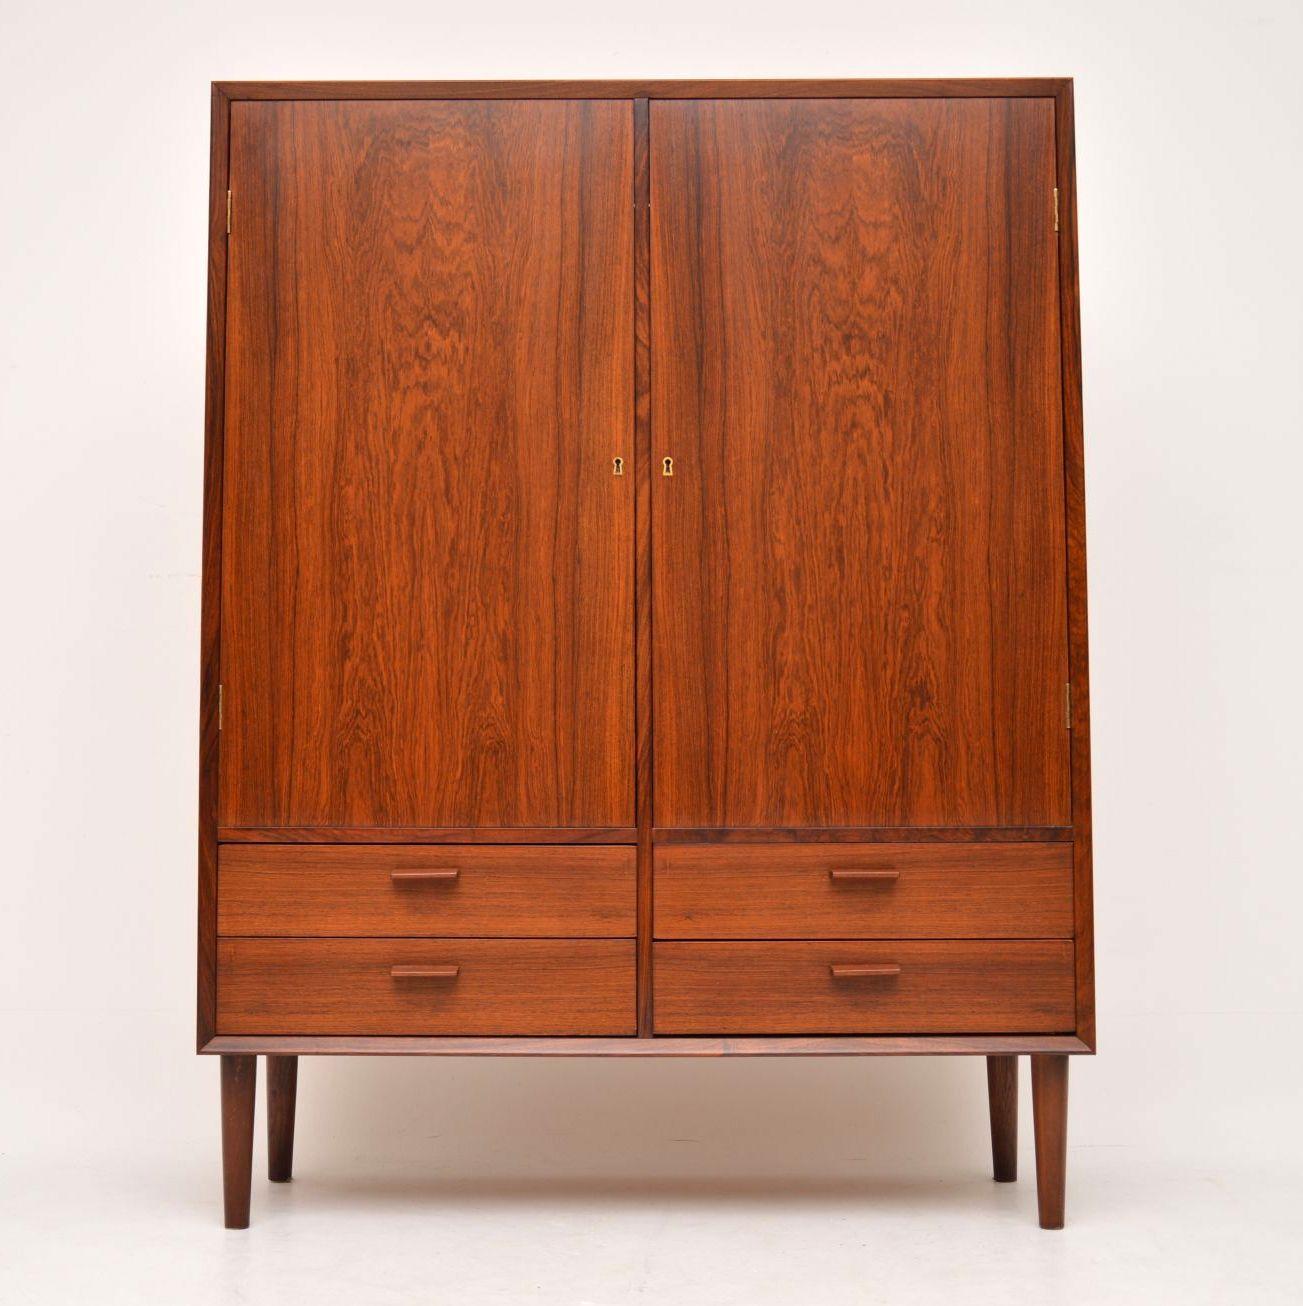 A stunning and rare vintage Danish cabinet, this was designed by Borge Mogensen, and it was made by Brouer in the 1960s. We have had this stripped and re-polished to a very high standard, including the inside; the condition is superb throughout. The